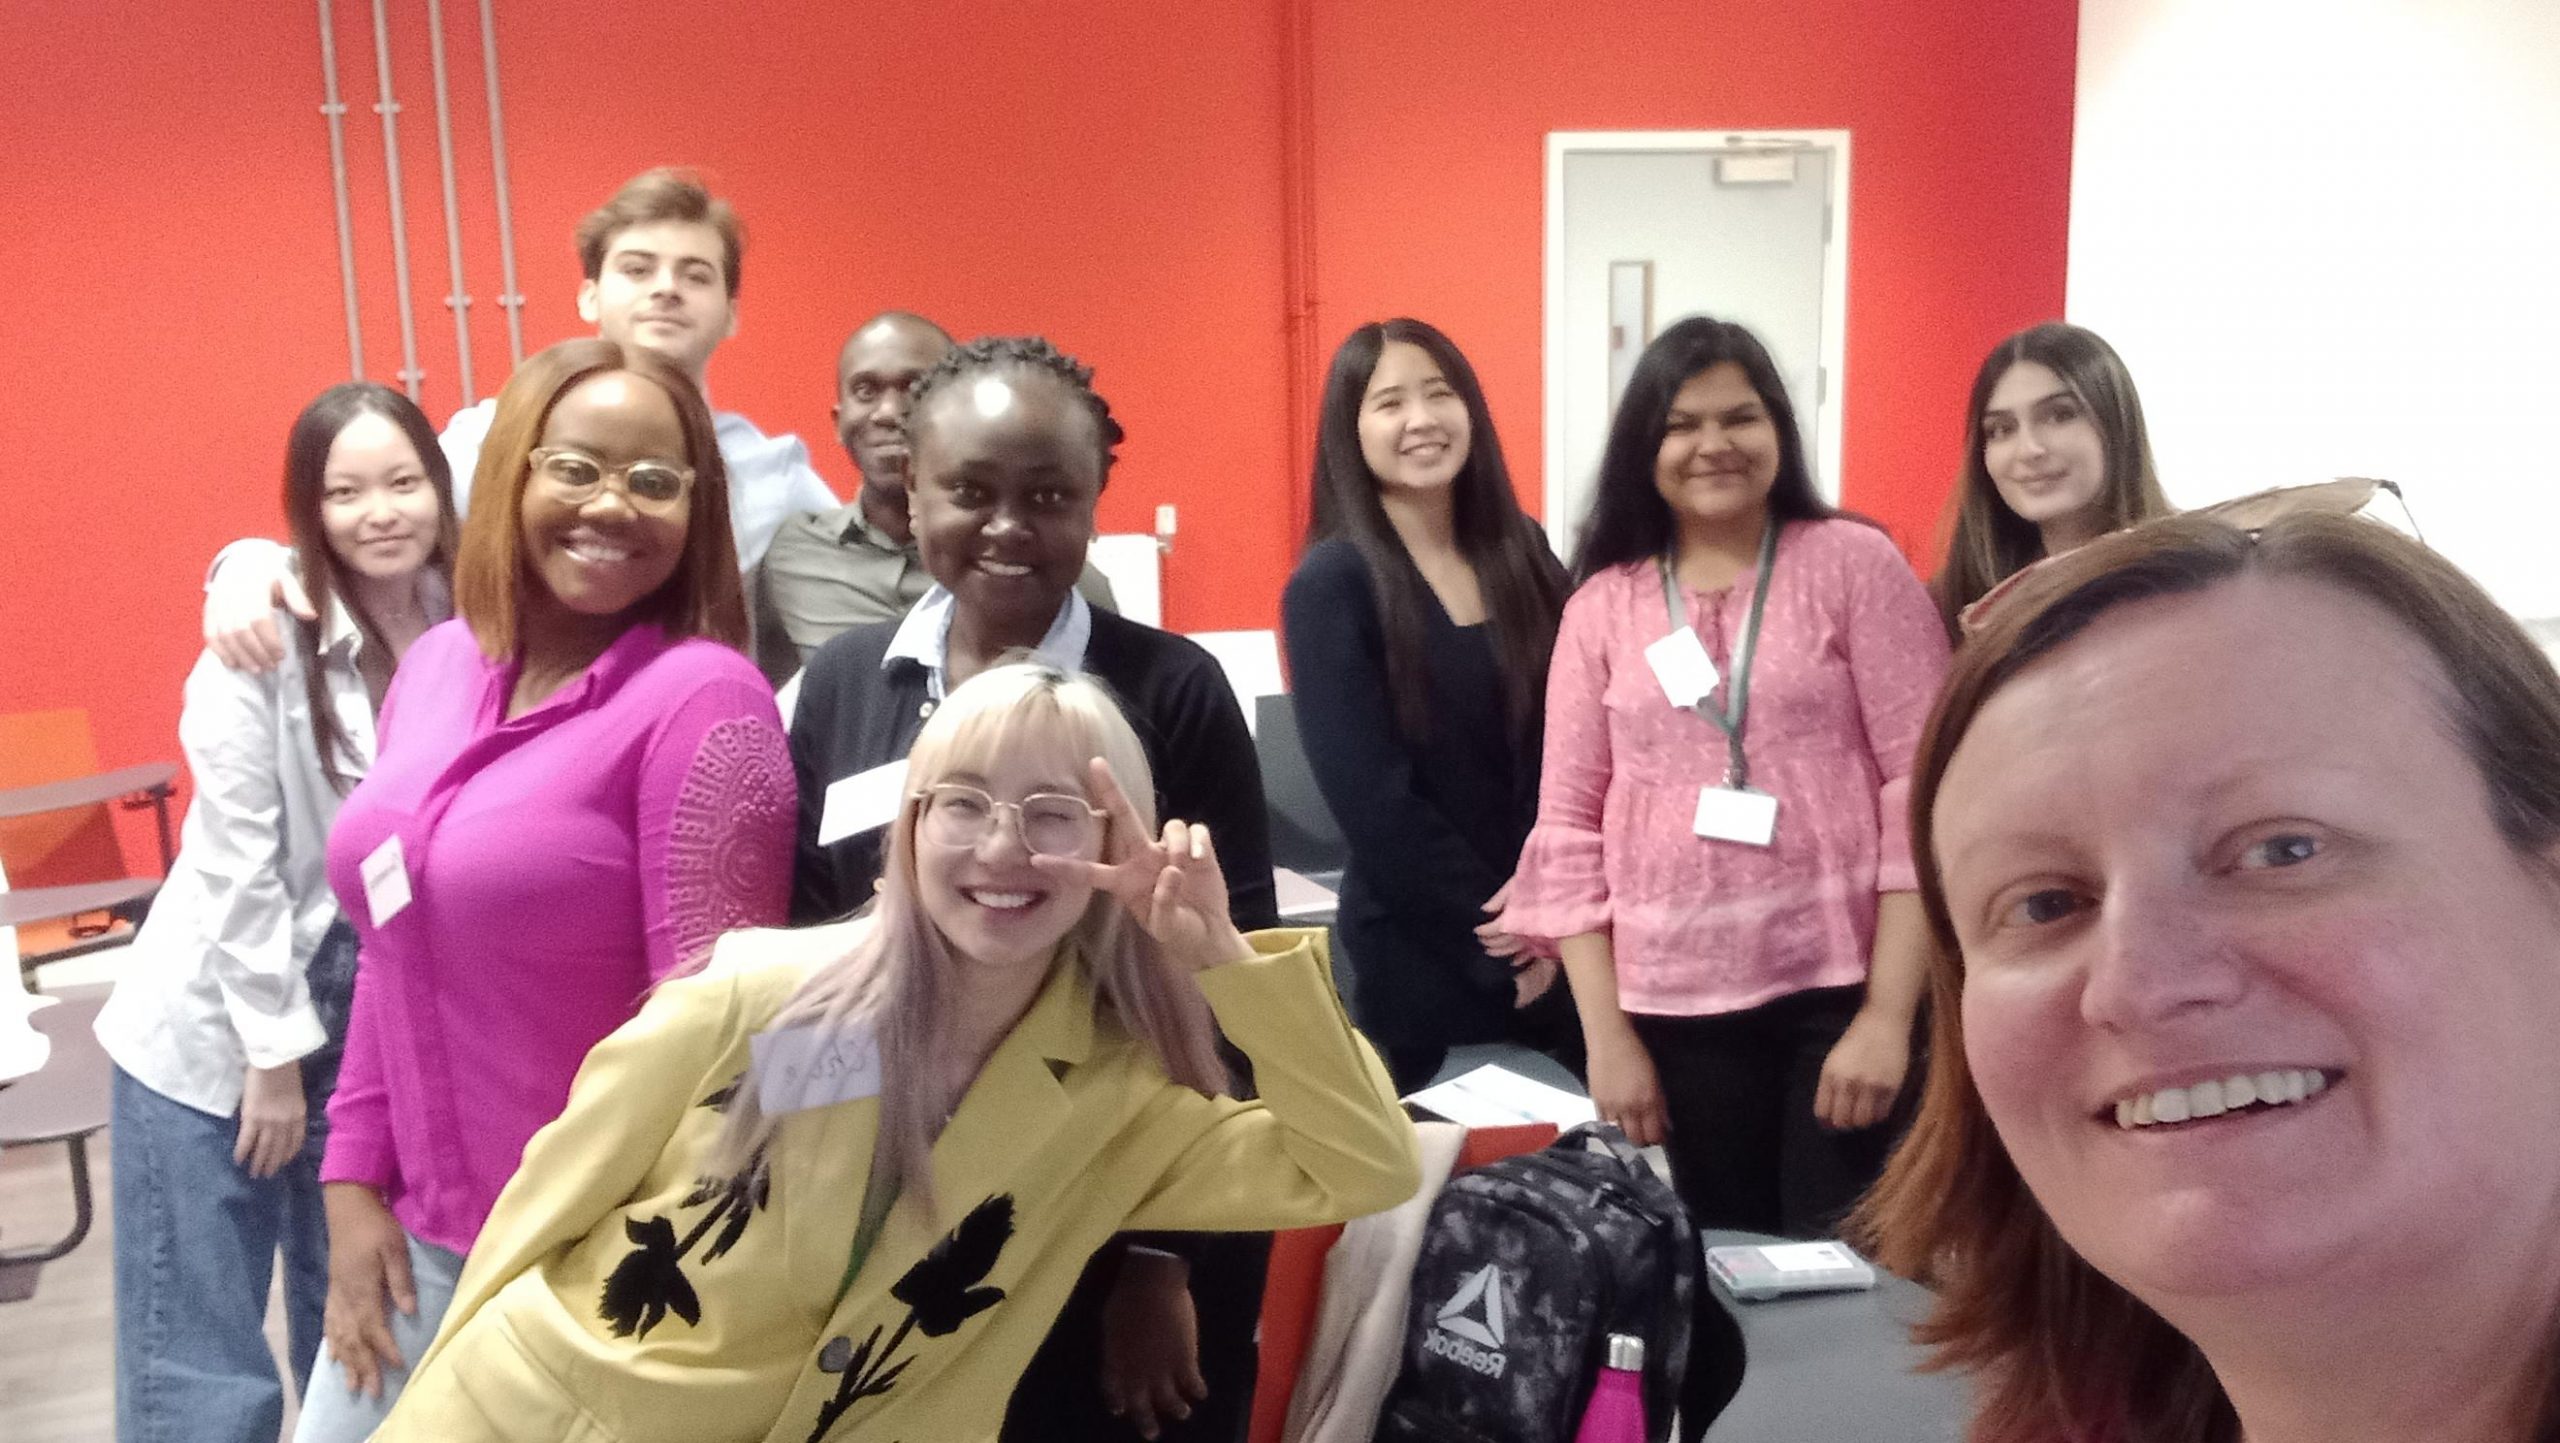 Westminster Community Consultancy Project (WCCP) group photo with Helen Green and student consultants